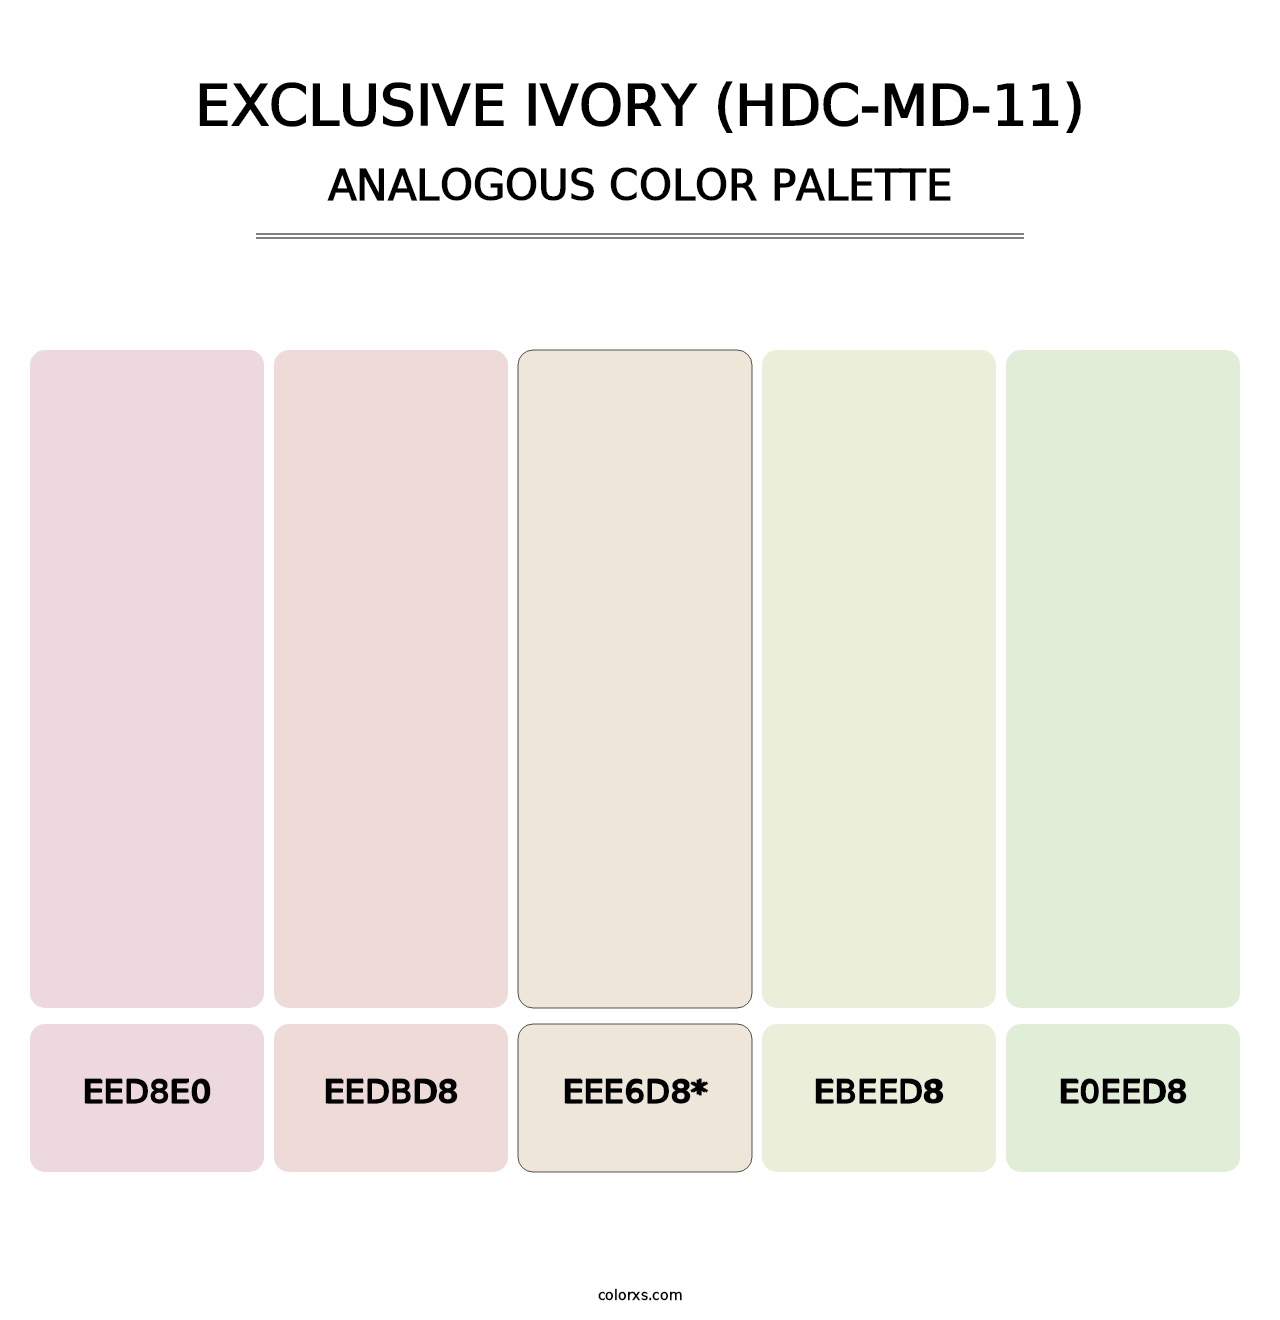 Exclusive Ivory (HDC-MD-11) - Analogous Color Palette